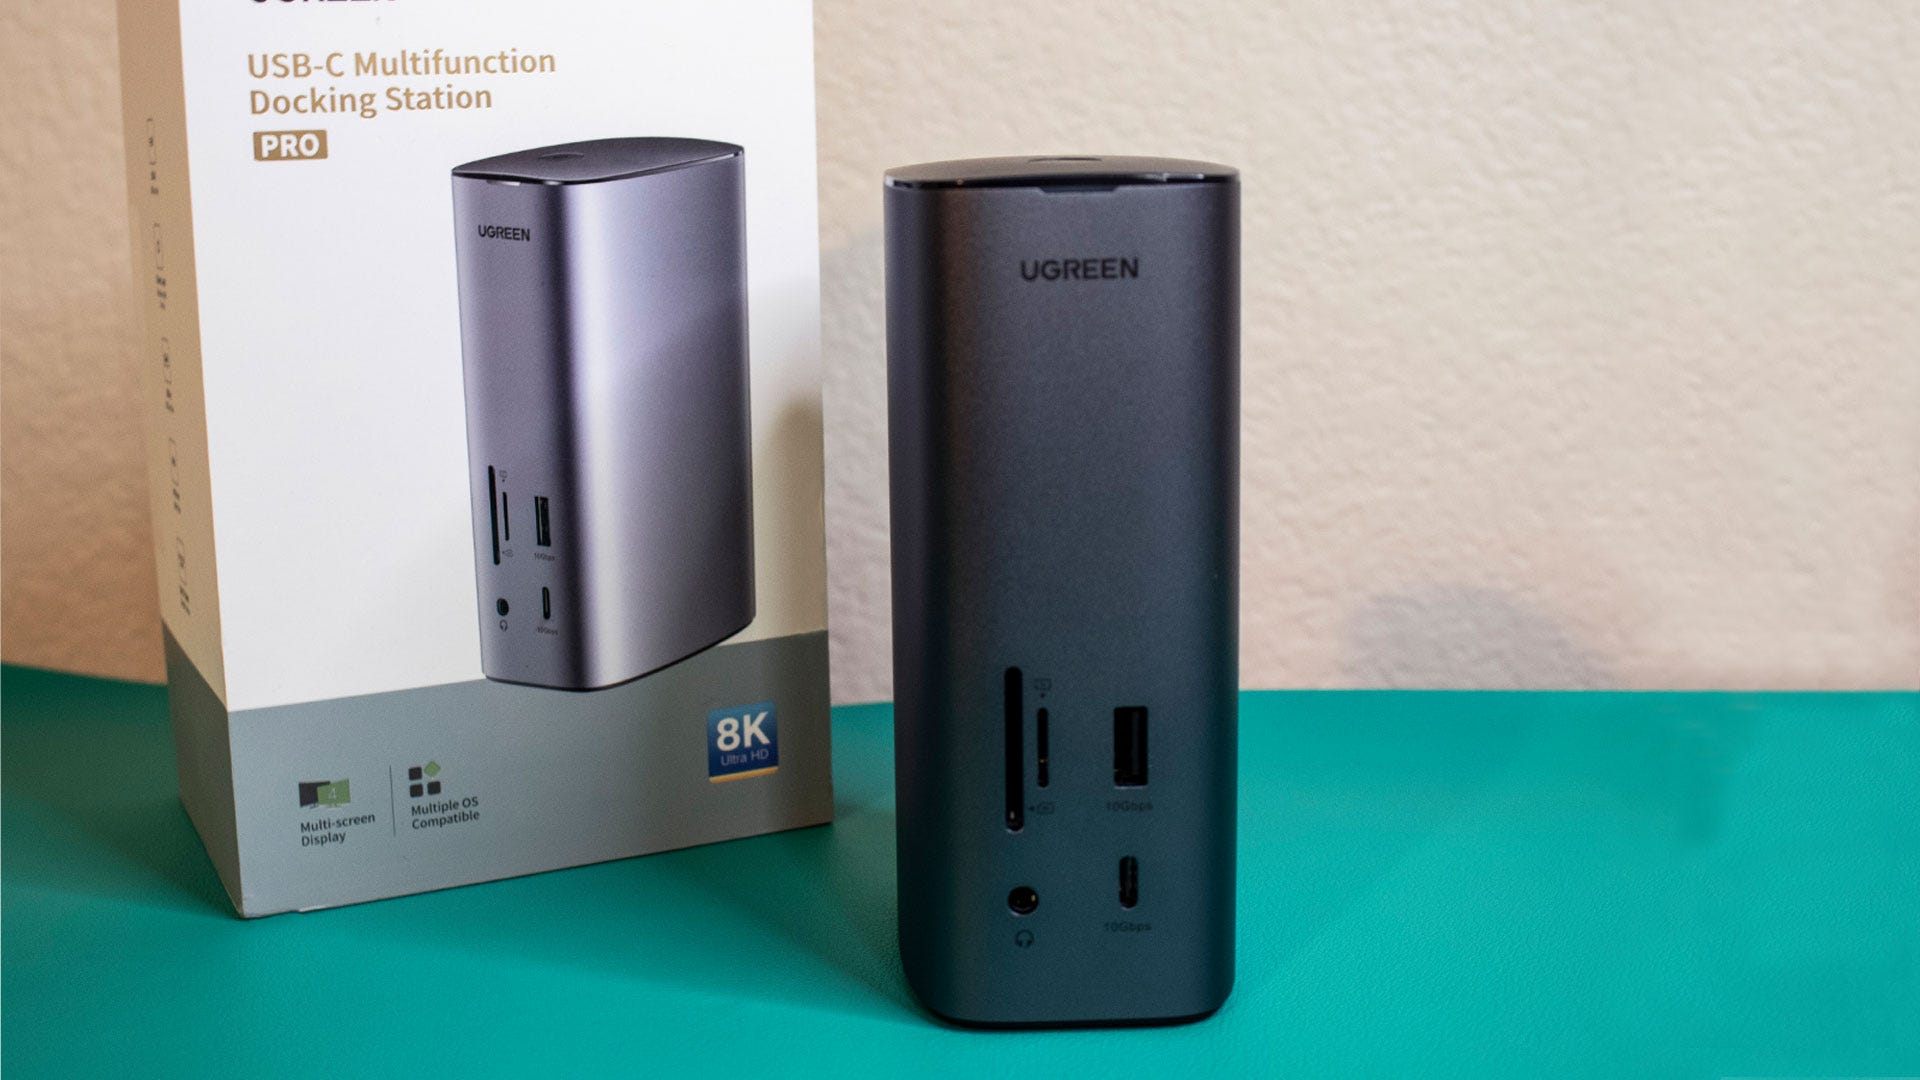 UGREEN USB-C Multifunction Docking Station Pro Review: A Telecommuting Necessity